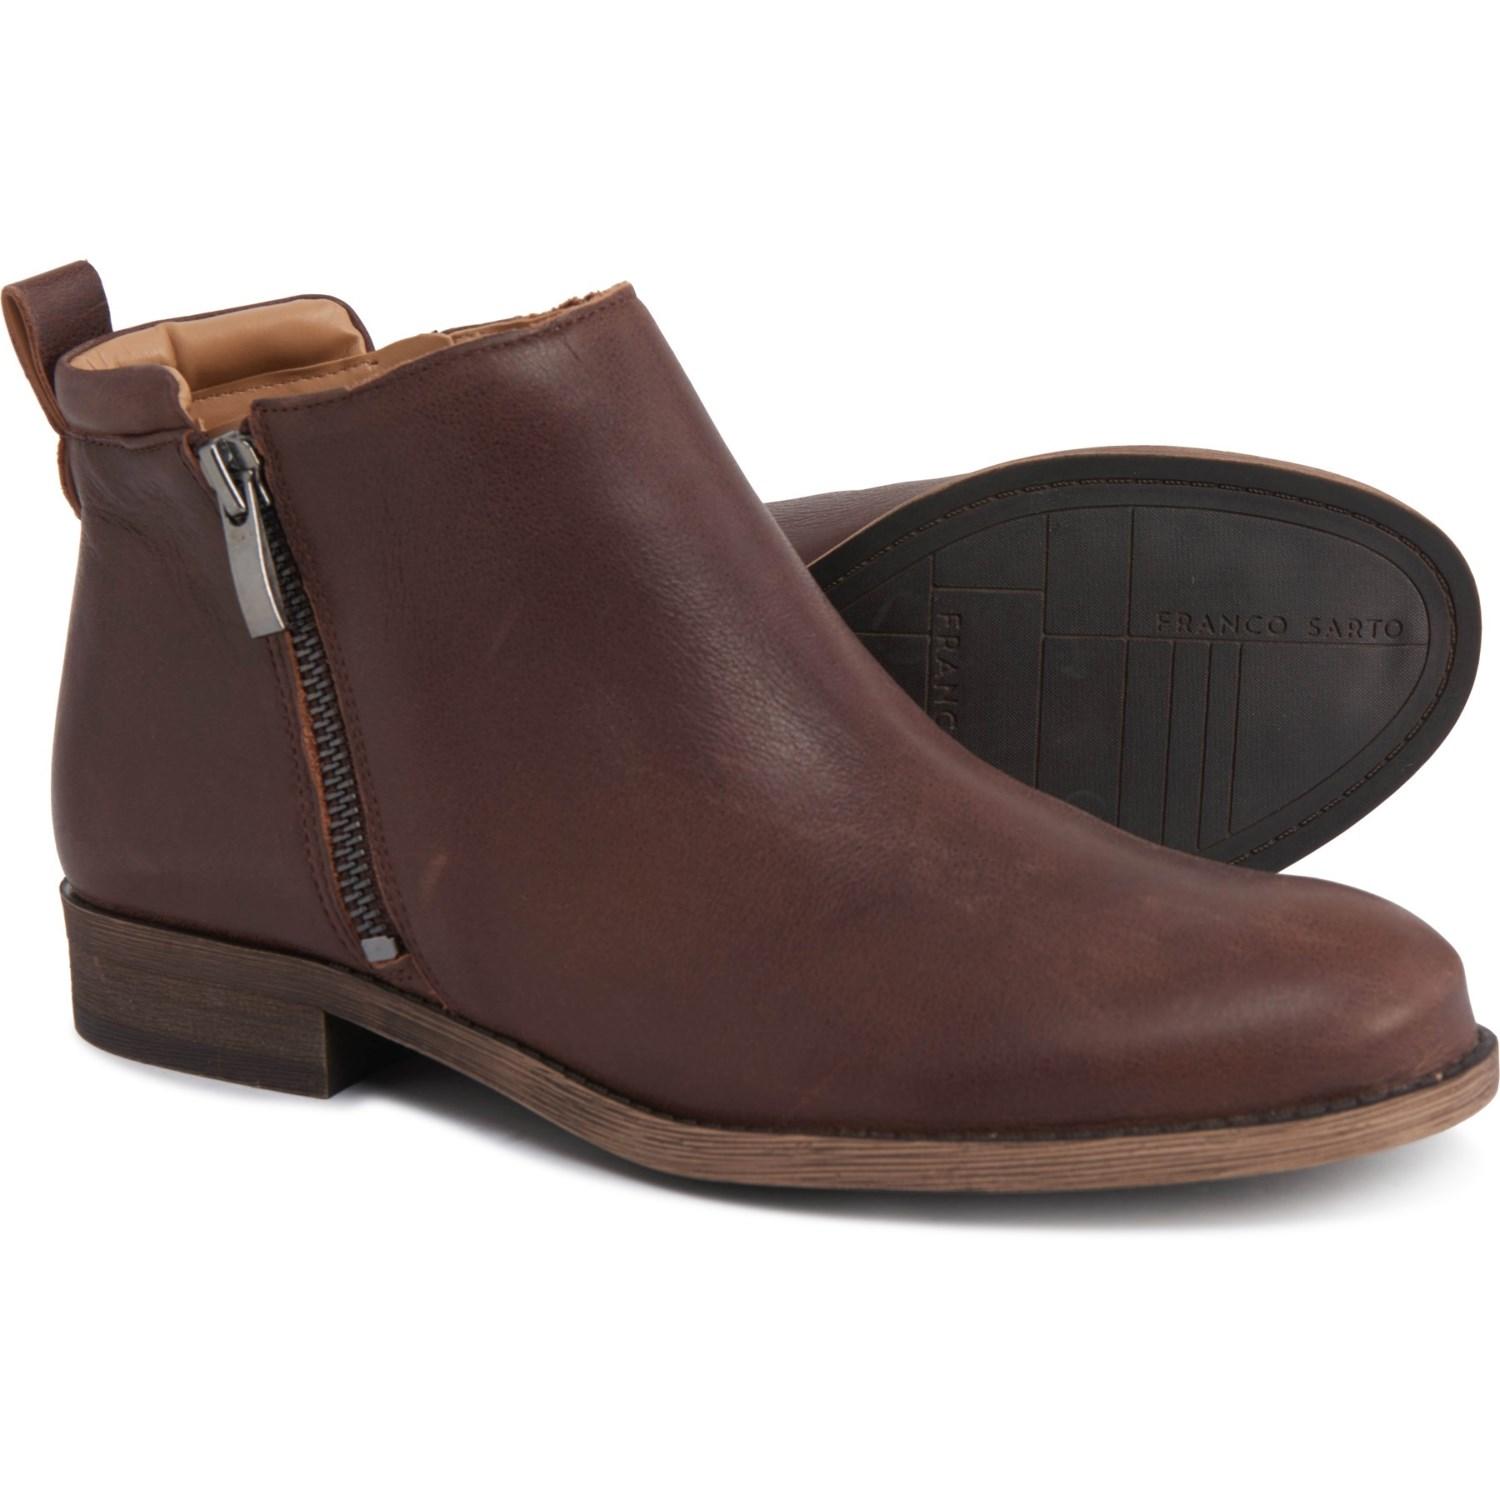 Franco Sarto Keegan Double-zip Leather Ankle Boots in Brown - Lyst